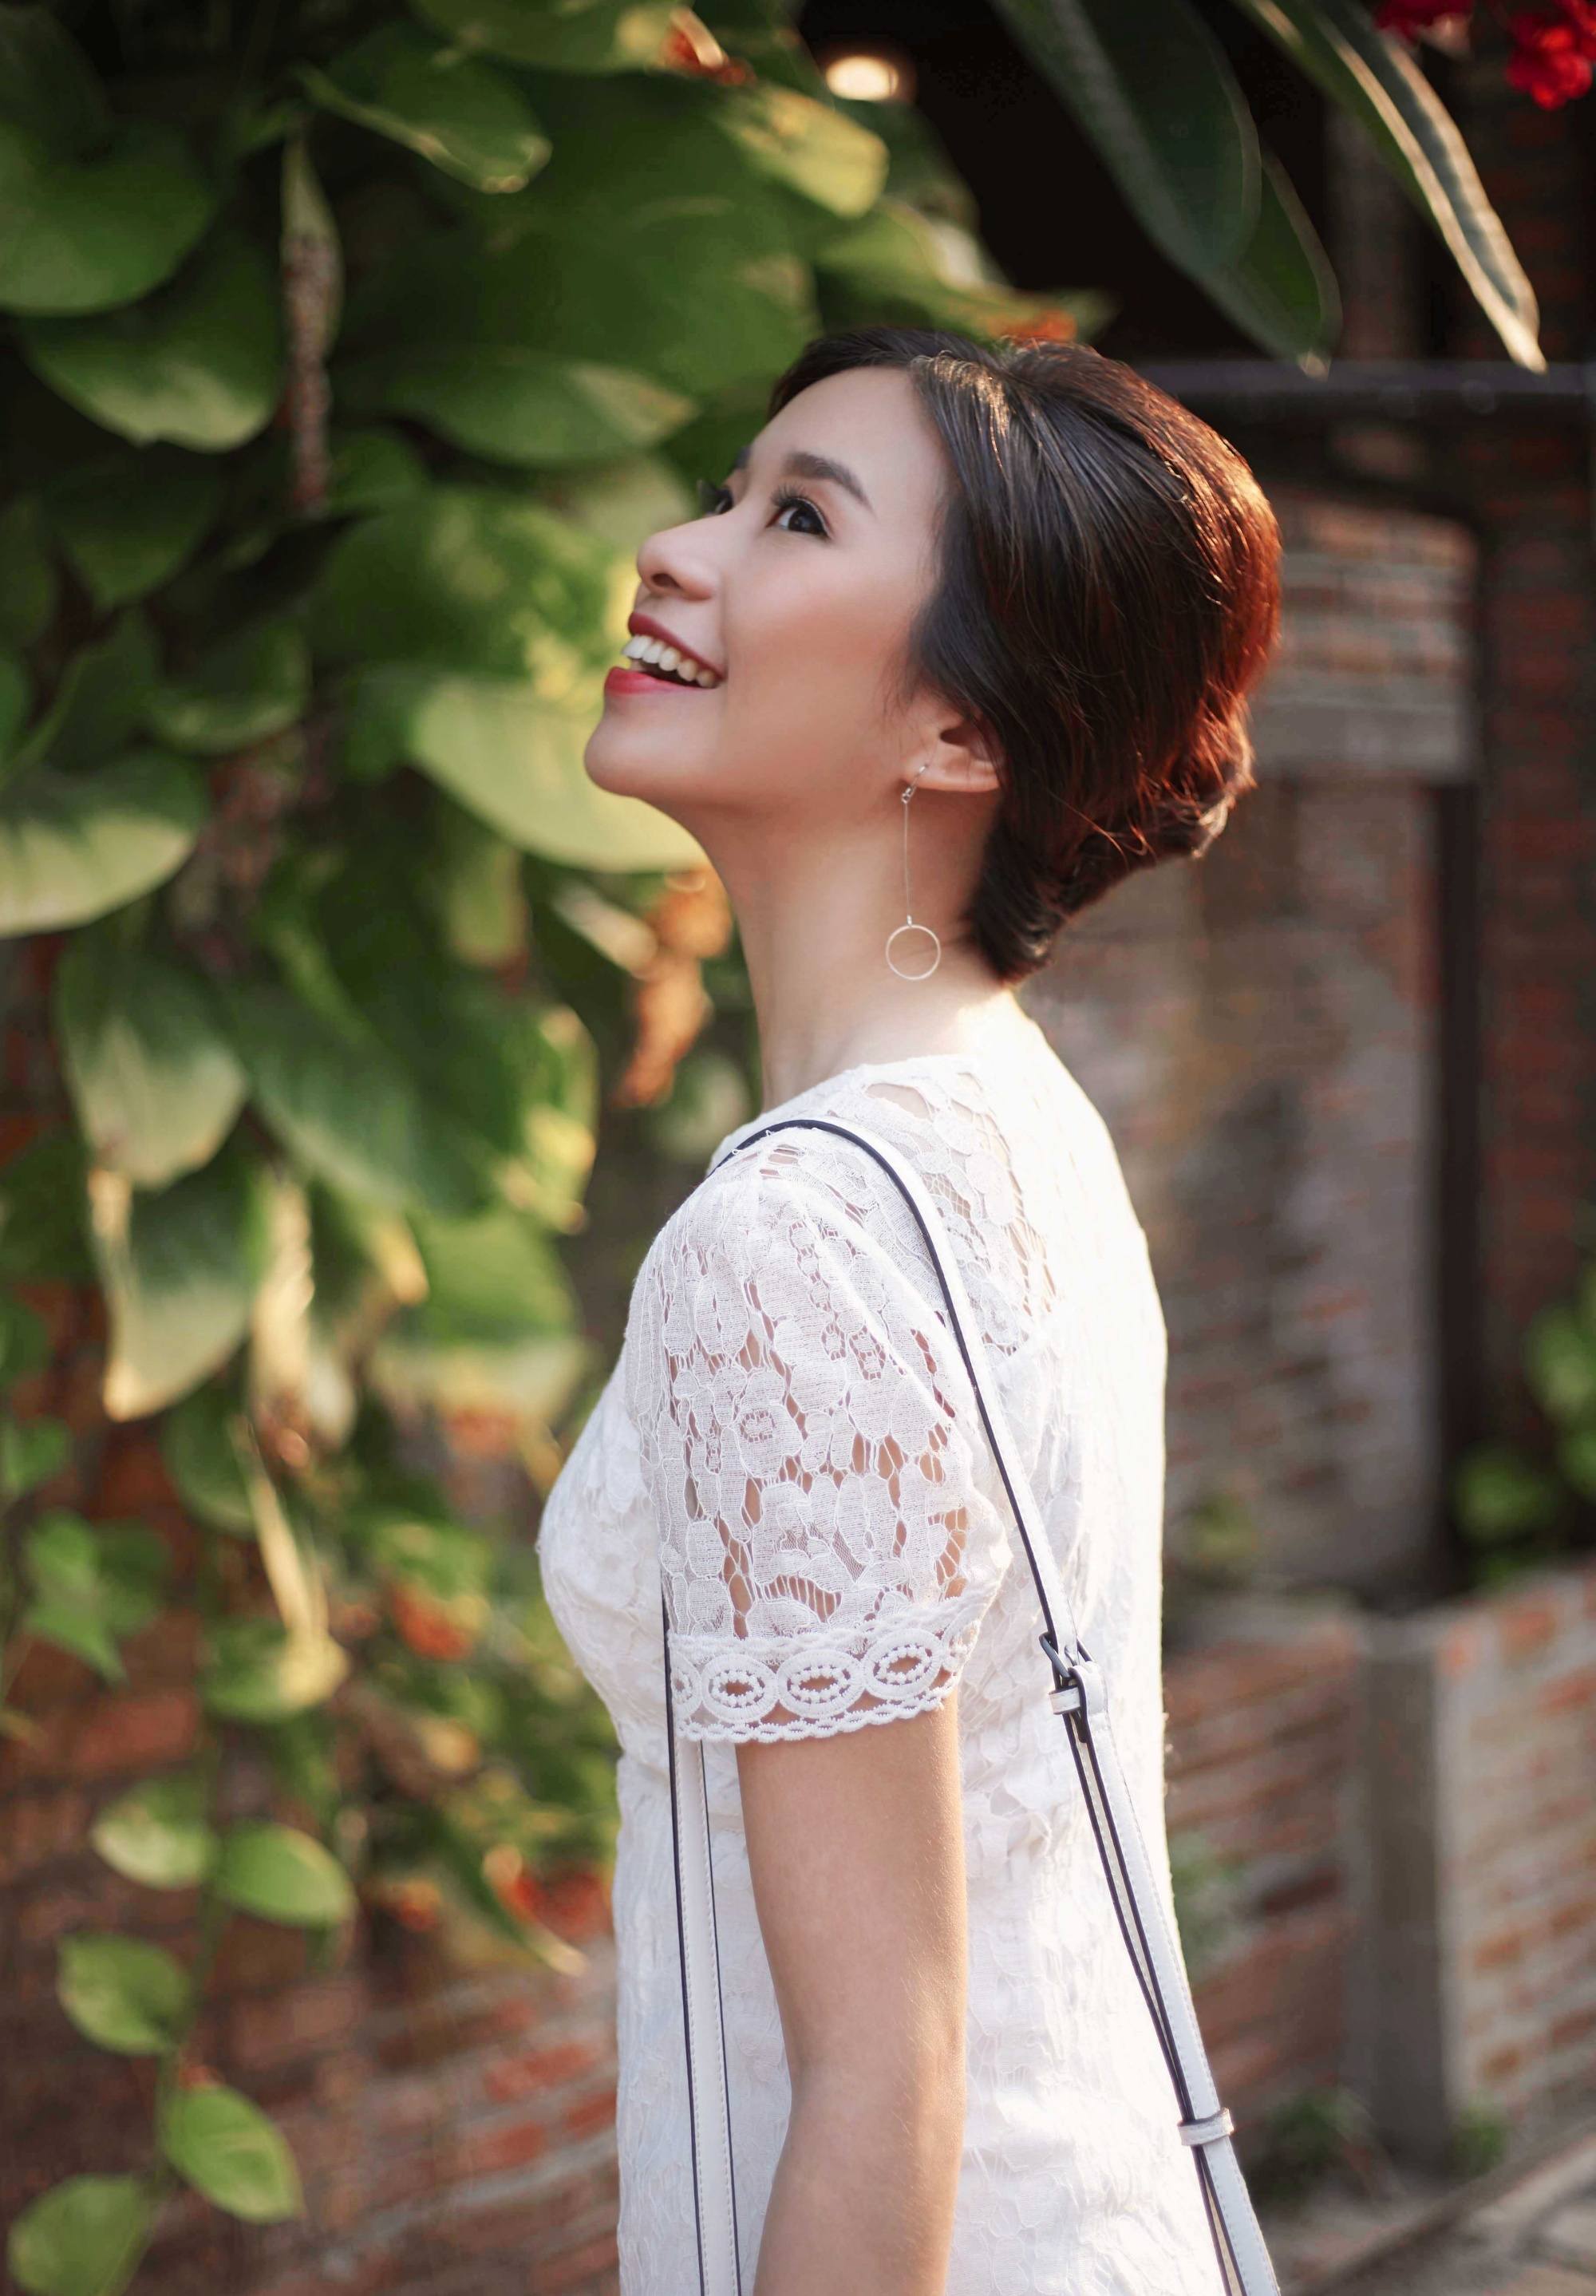 Side view of an Asian woman with hair in a French twist wearing a white dress outdoors